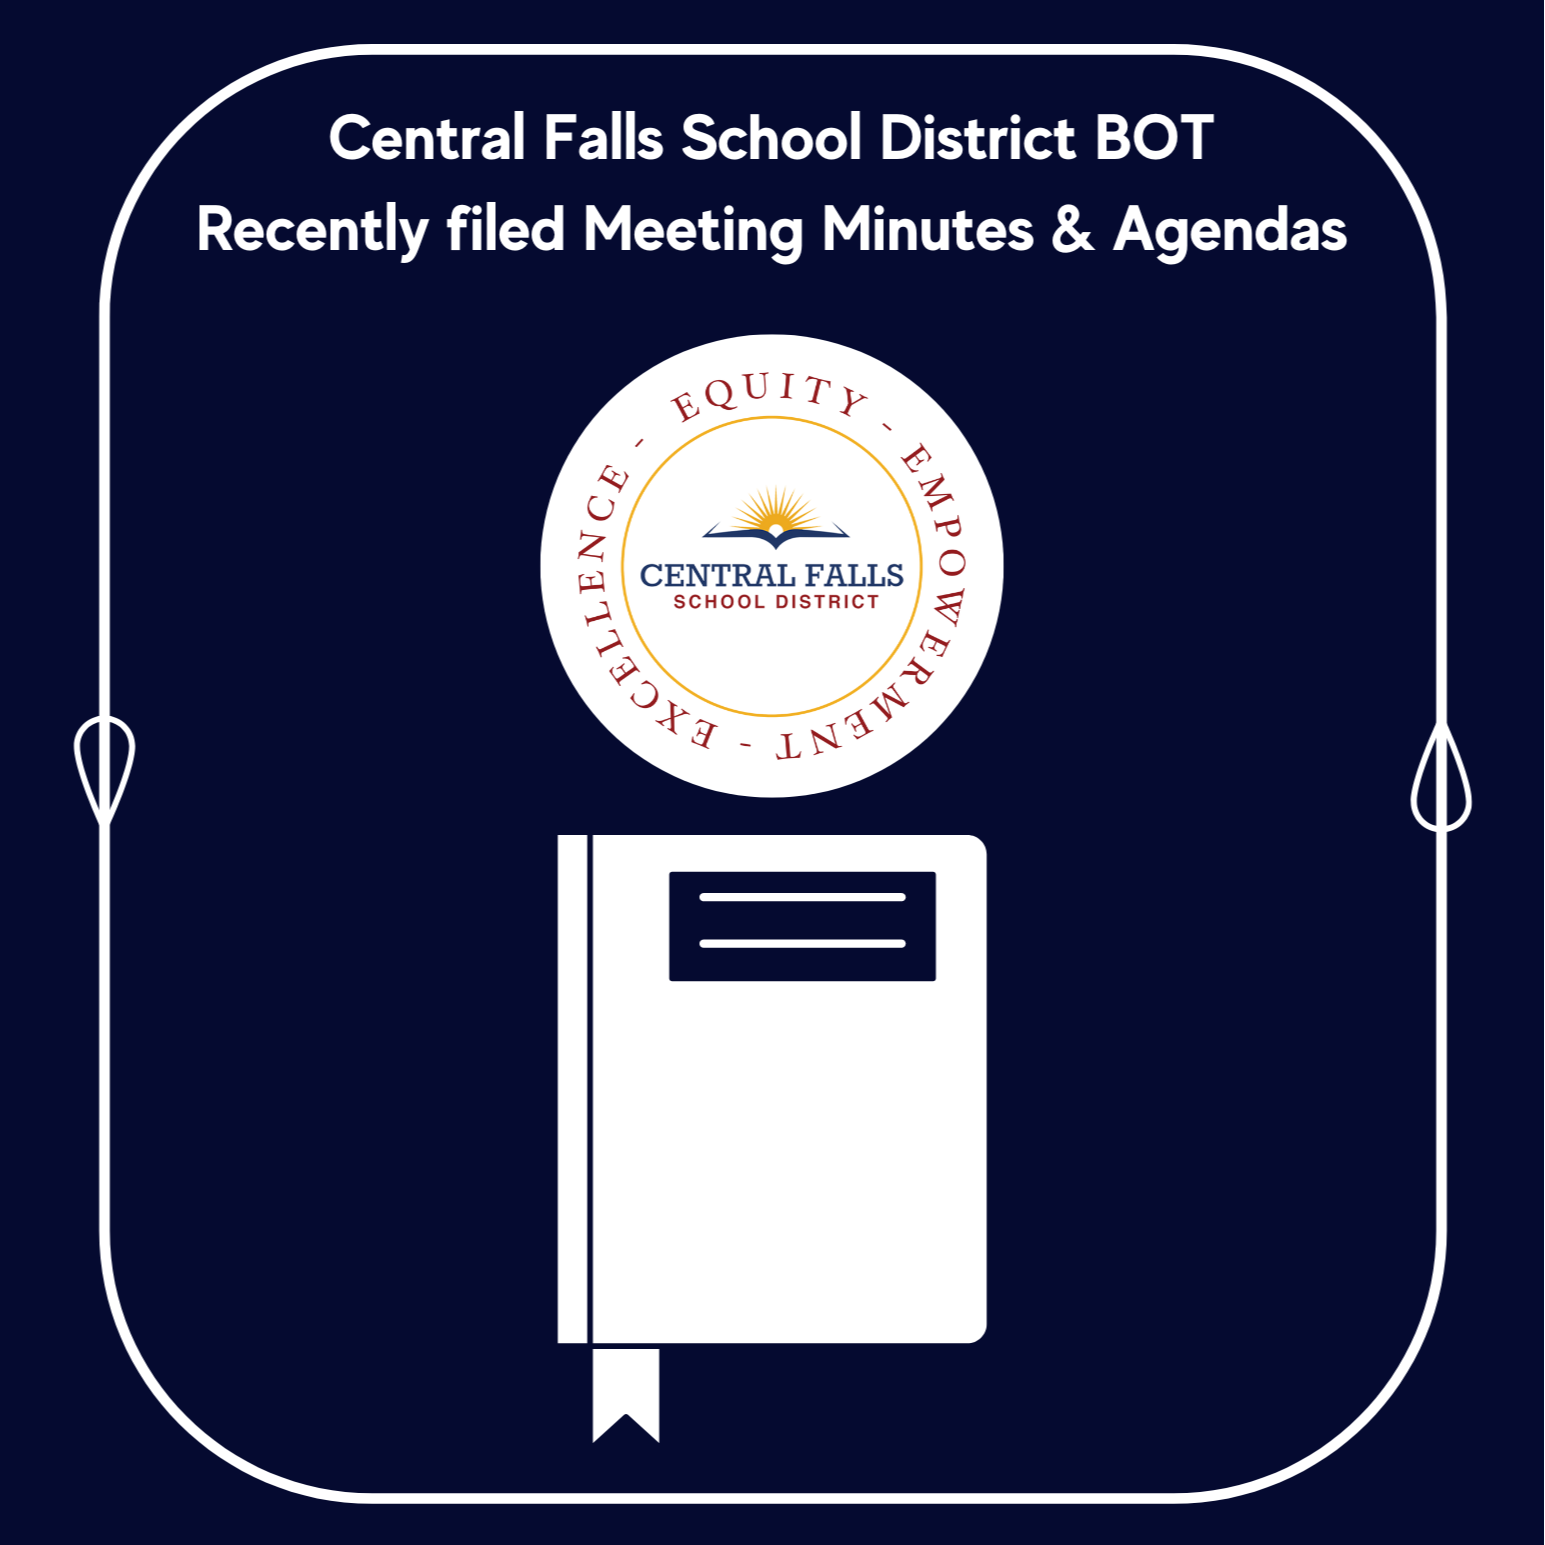 Central Falls School District Recently filed meeting Minutes & Agendas